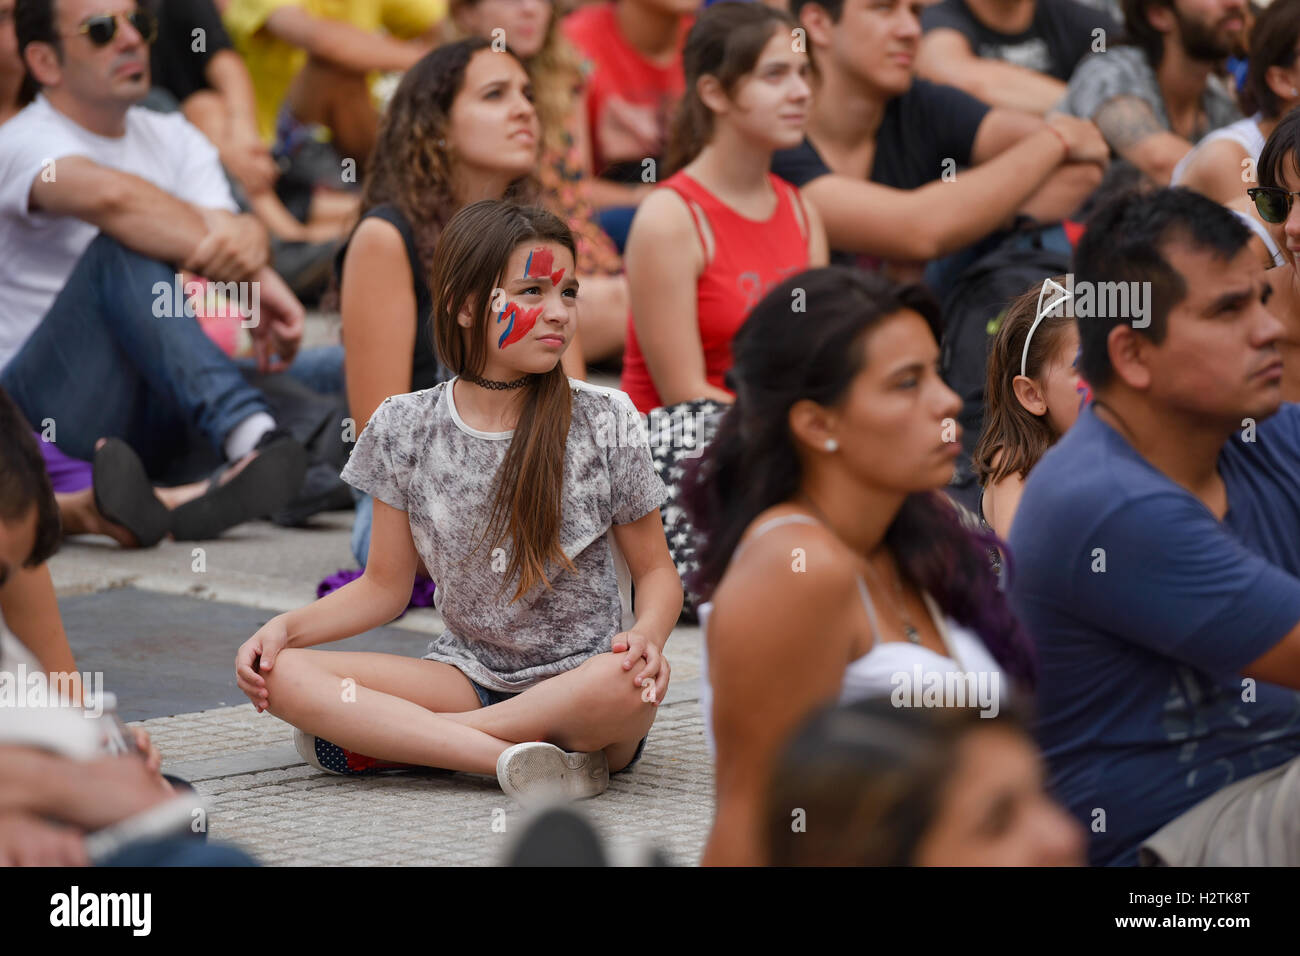 Buenos Aires, Argentina. 13 Jan, 2016. Bowie's fans wears tribute make-up during a projection of David Bowie's videos. Stock Photo